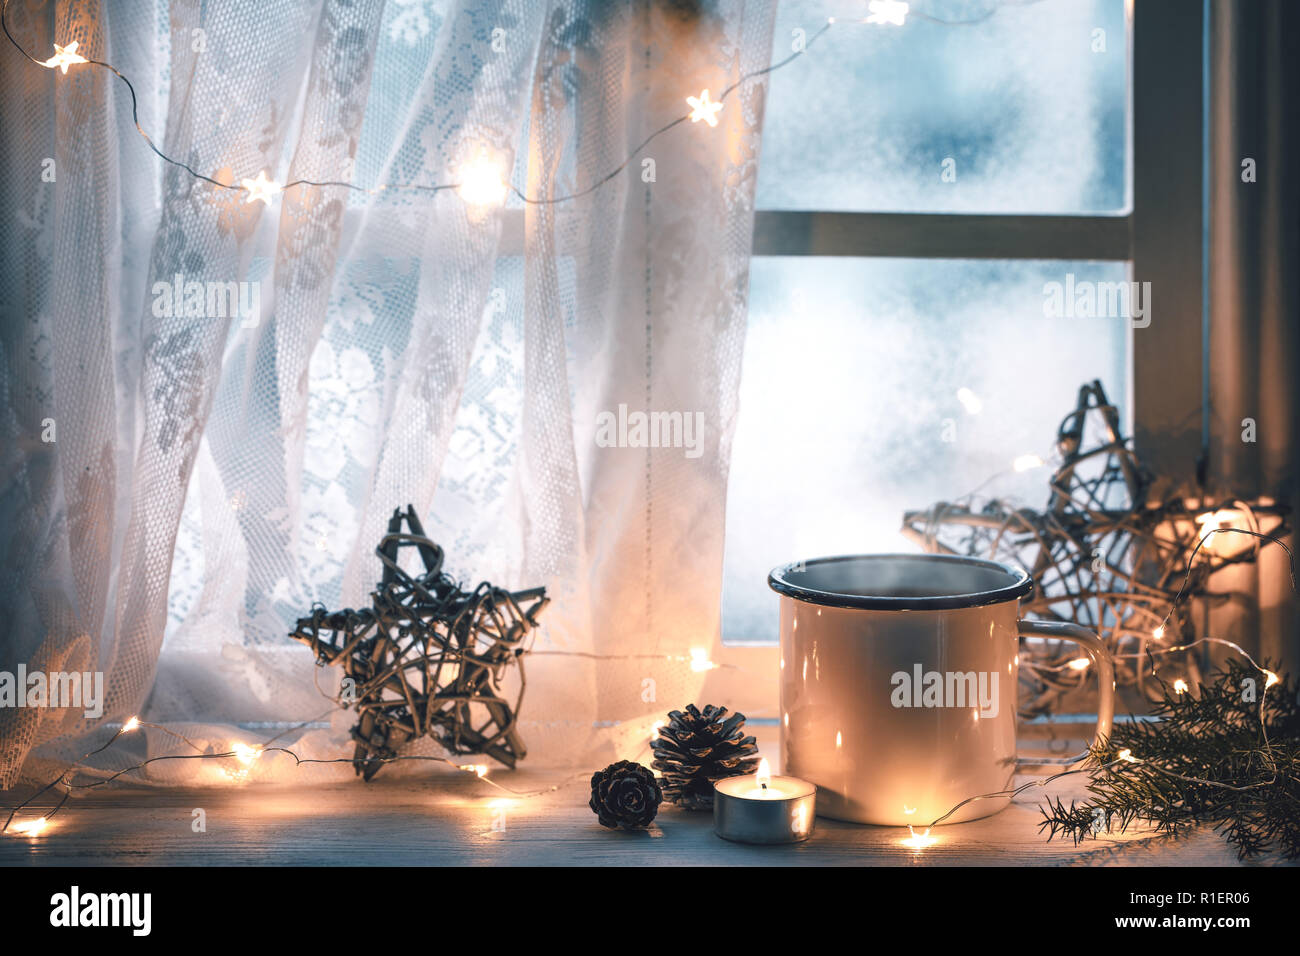 Merry Christmas and happy holidays Window with a cup of hot drink,new year decoration. Stock Photo